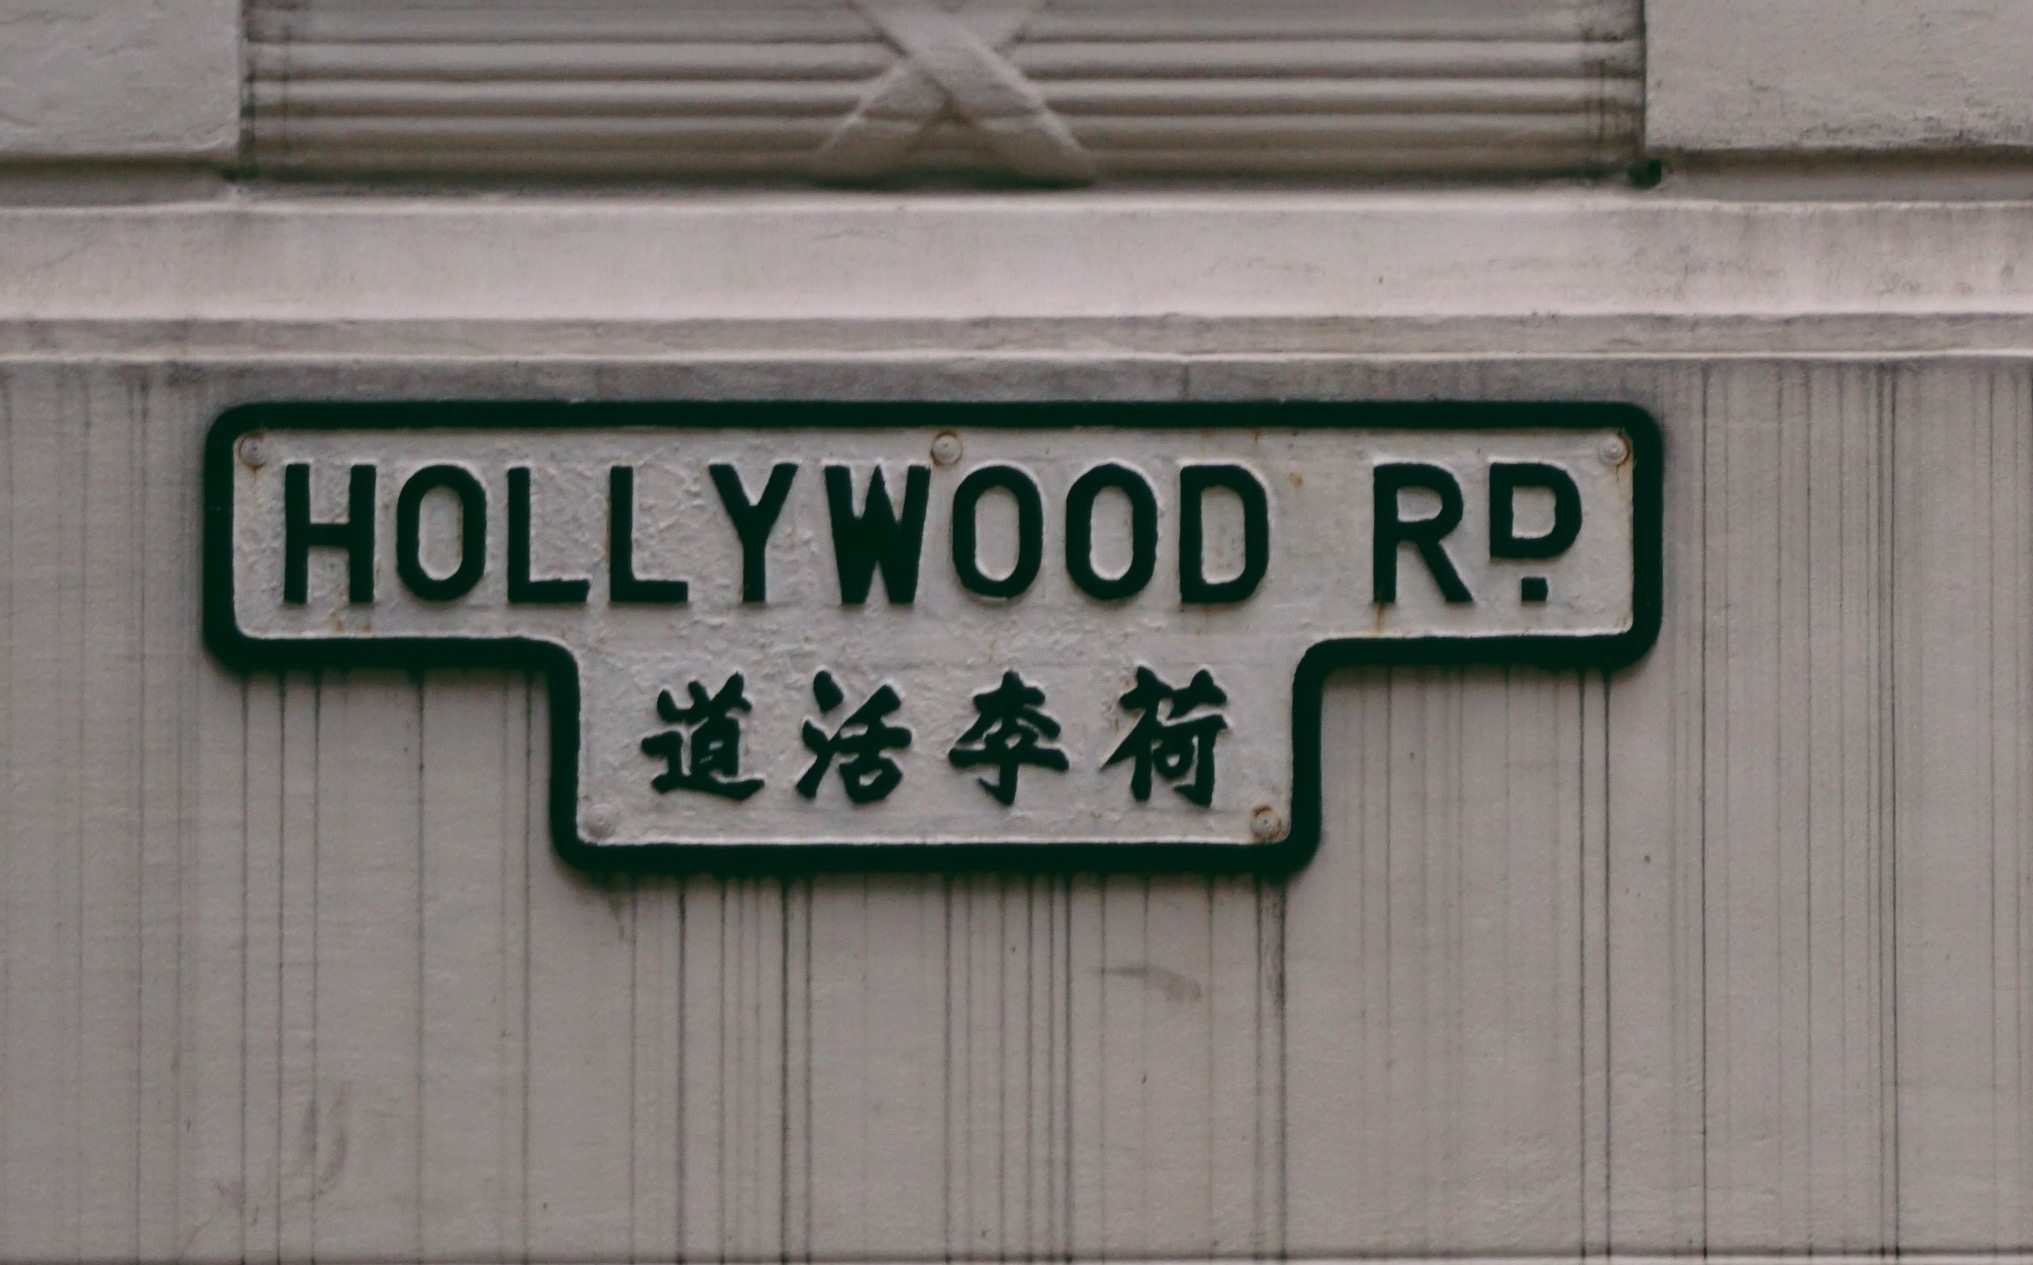 Hollywood Road is Hong Kong’s second oldest paved road and its historic sights, and busy shops and stalls have long made it popular with visitors. Photo: SCMP